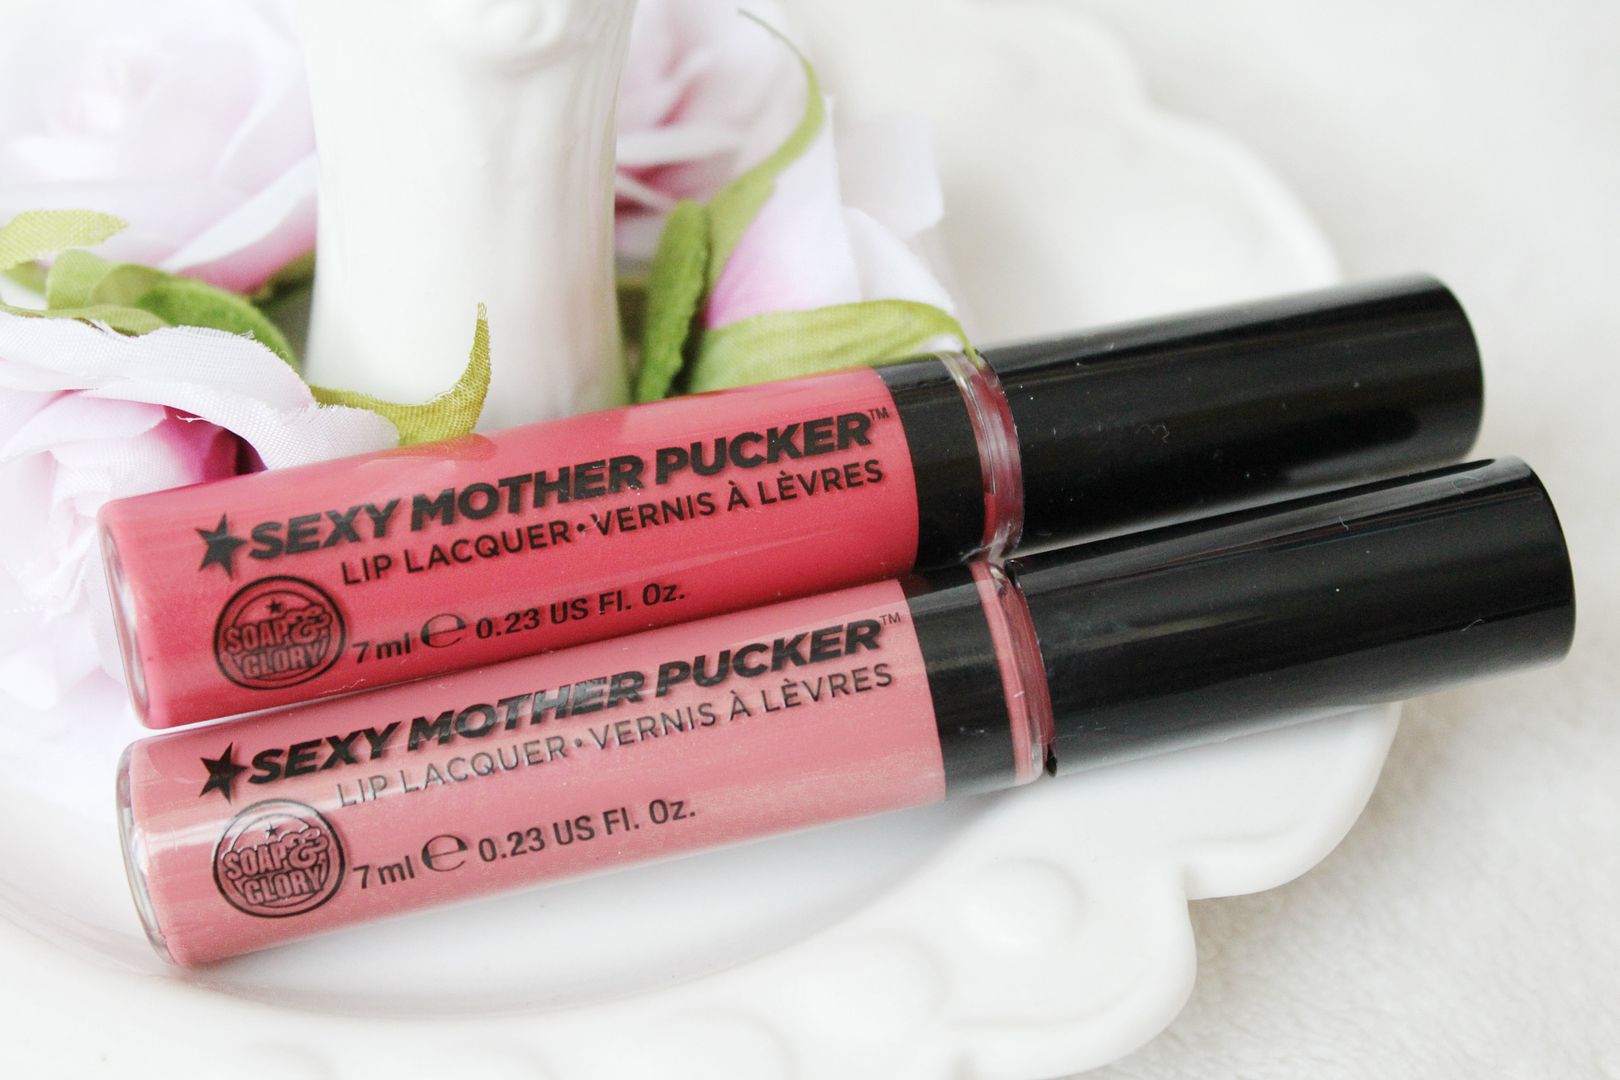 Soap And Glory Sexy Mother Pucker Lip Lacquers What Cha Ma Coral Charm Offensive Bold Spring Lips Review Belle Amie UK Beauty Fashion Lifestyle Blog